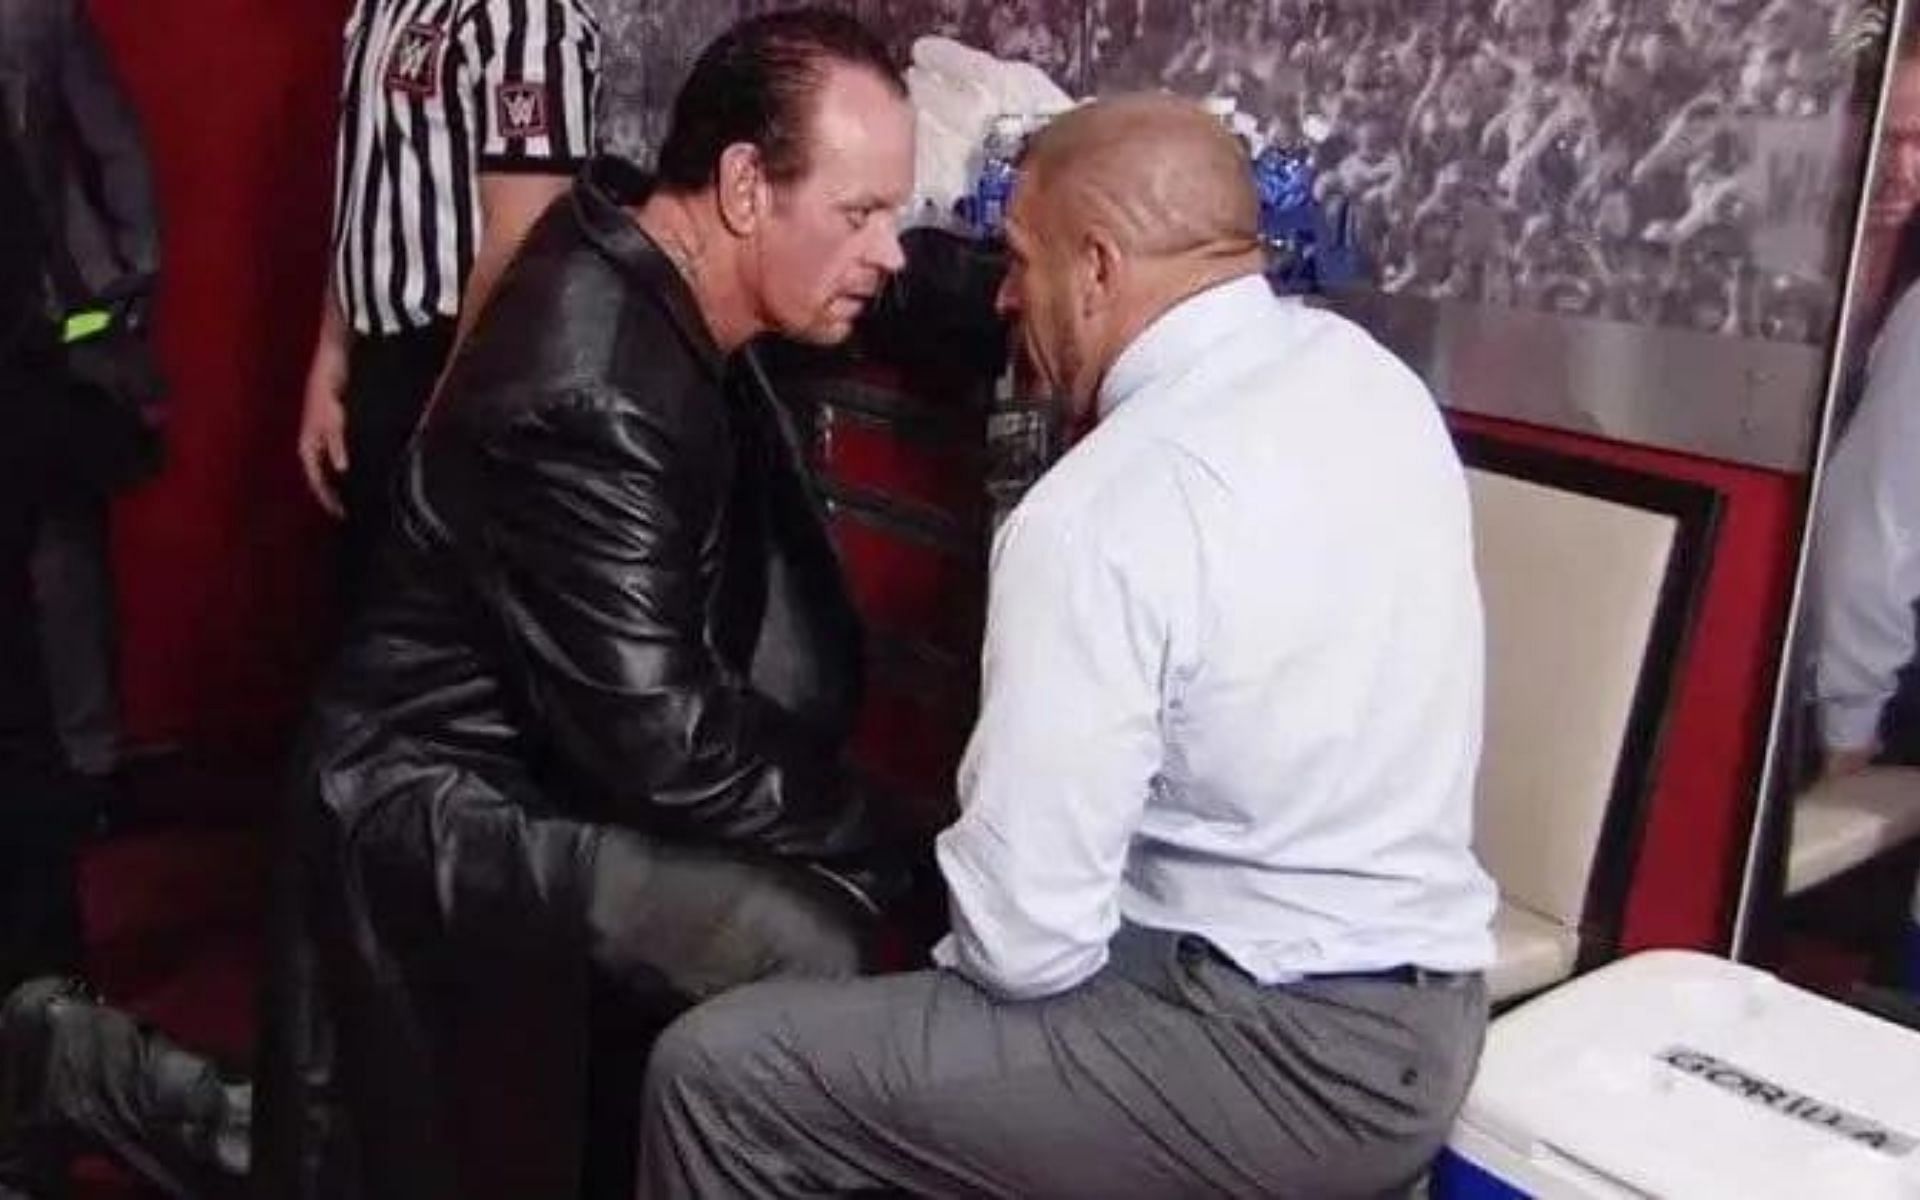 WWE legends, The Undertaker and Triple H